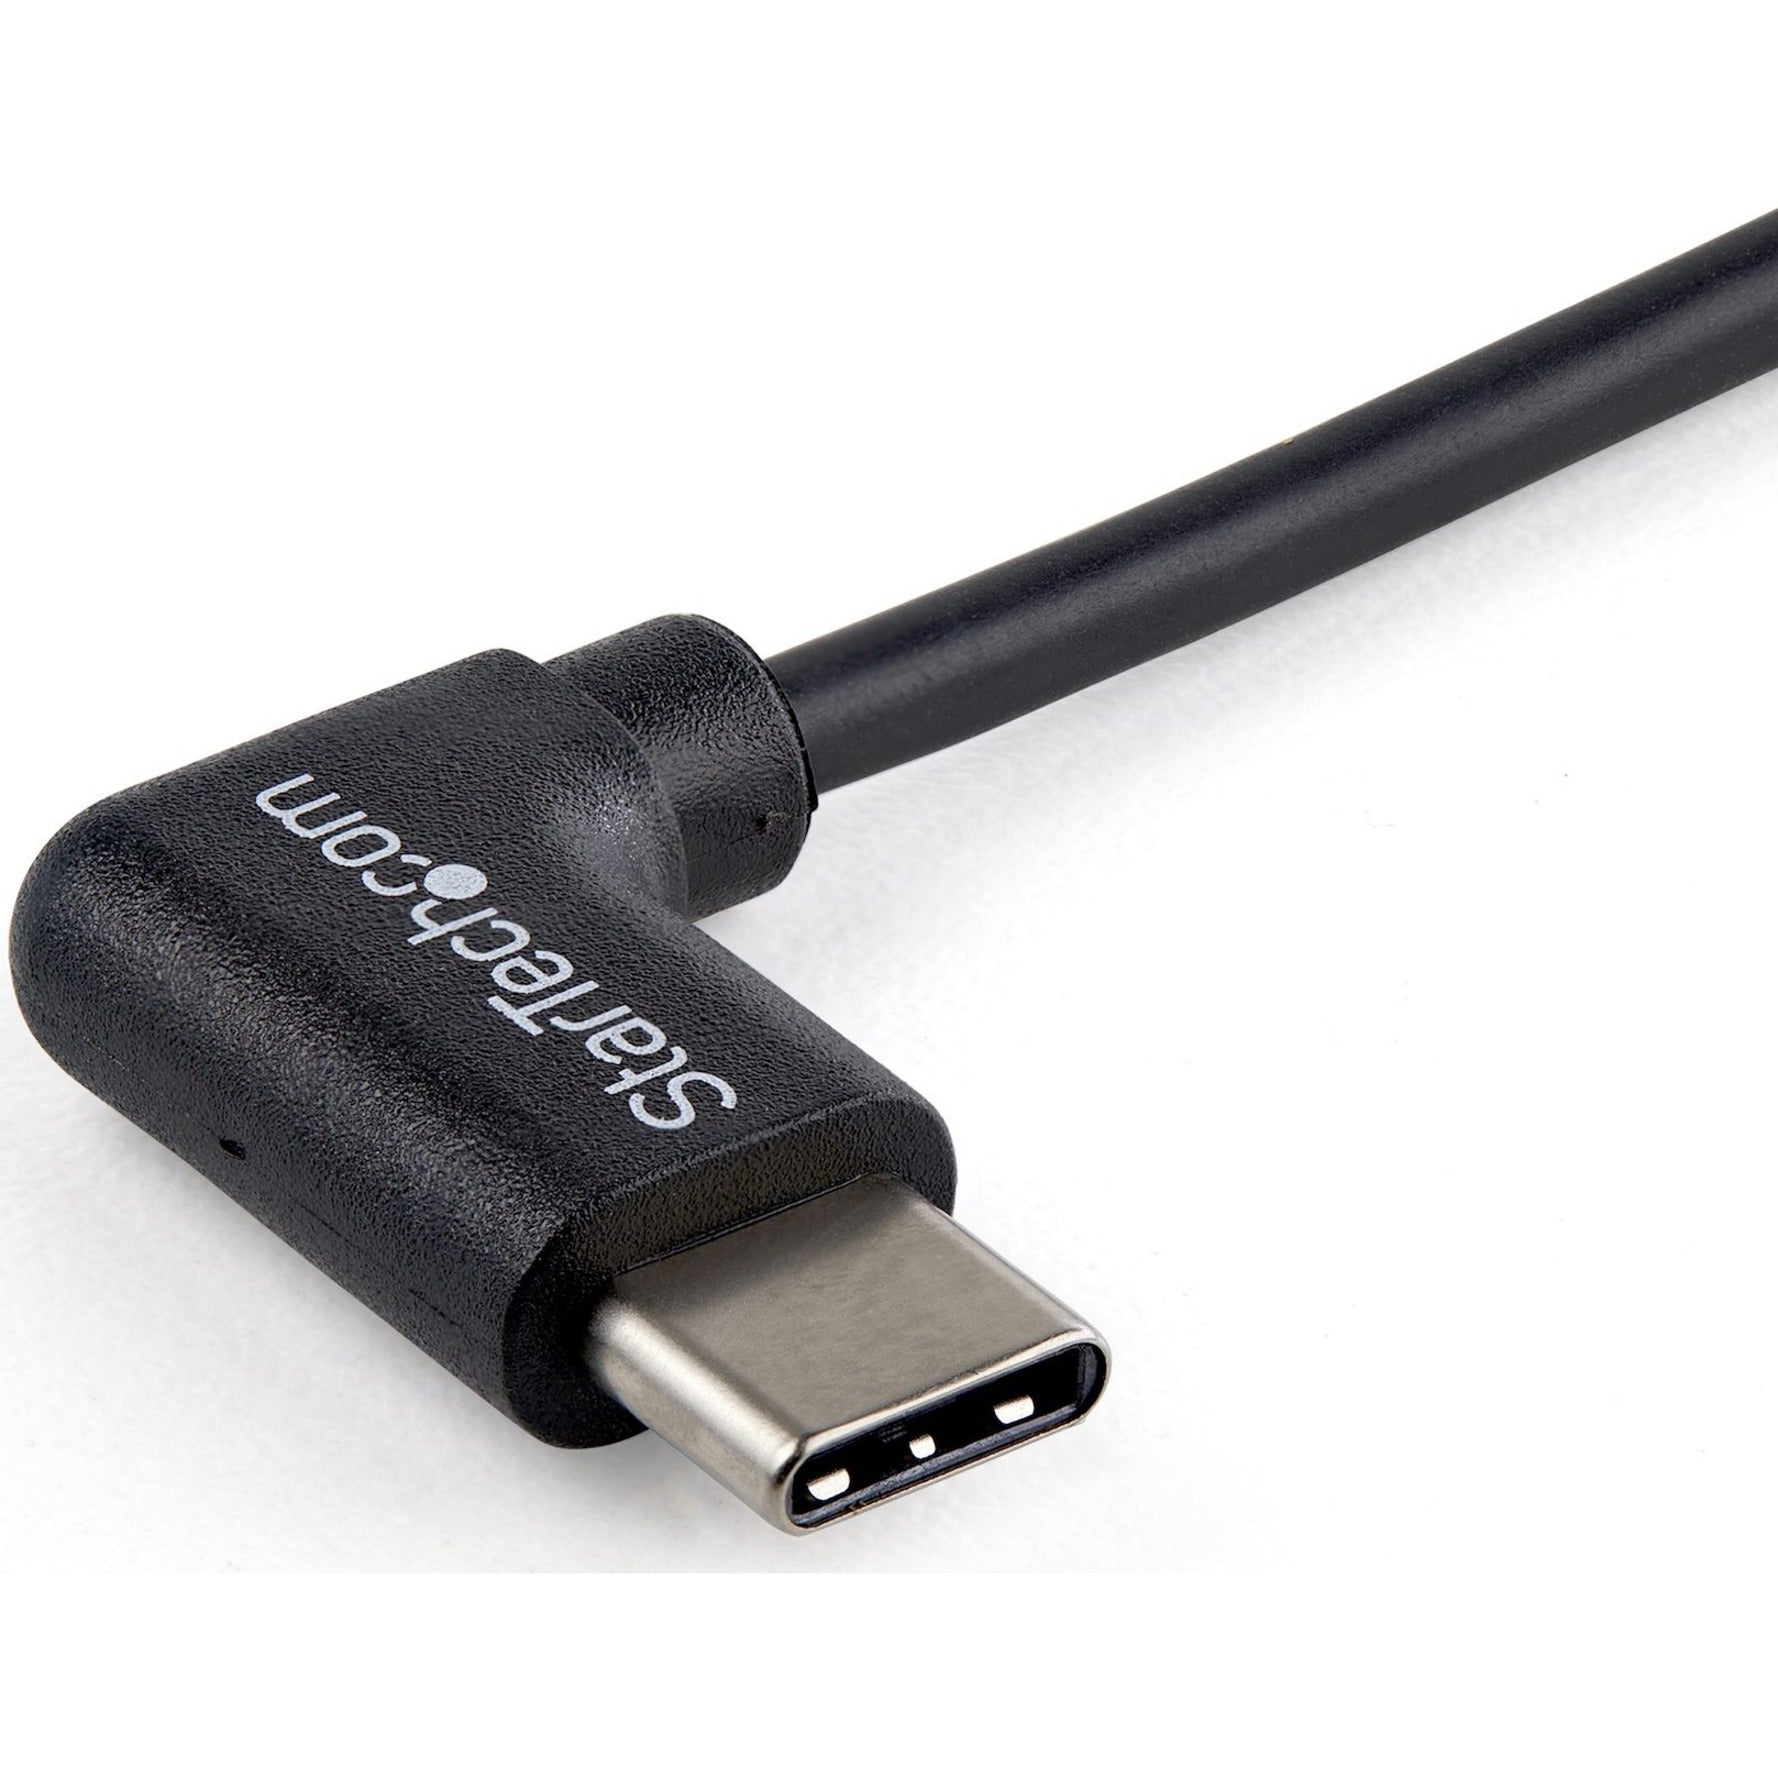 StarTech.com USB2AC1MR USB-A to USB-C Cable - Right-Angle - 1m 3ft, Fast Charging, Data Transfer, Bend Resistant